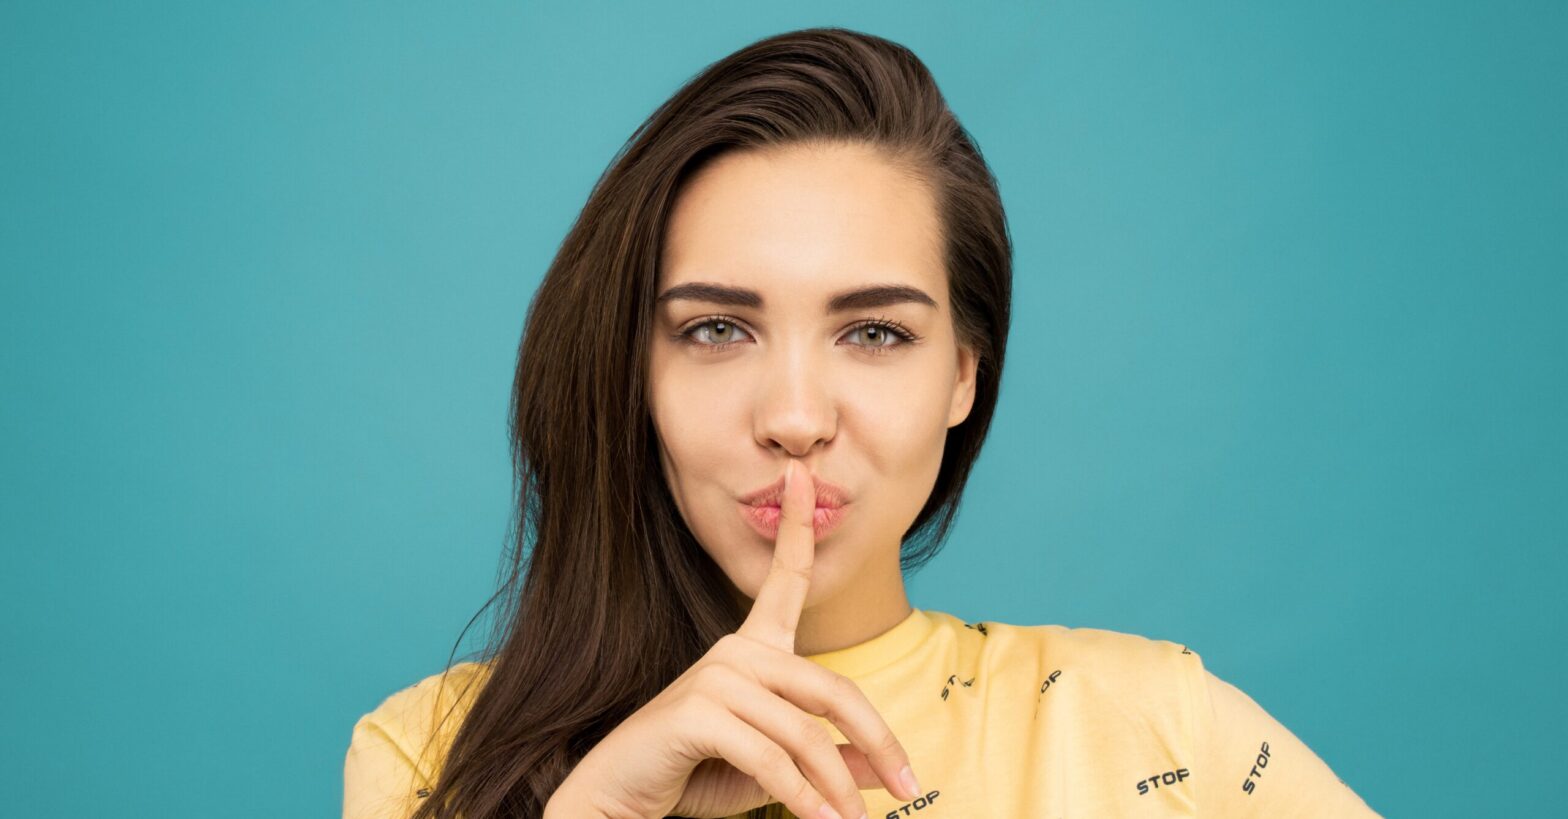 Woman hoding a finger on her mouth as a sign of silence